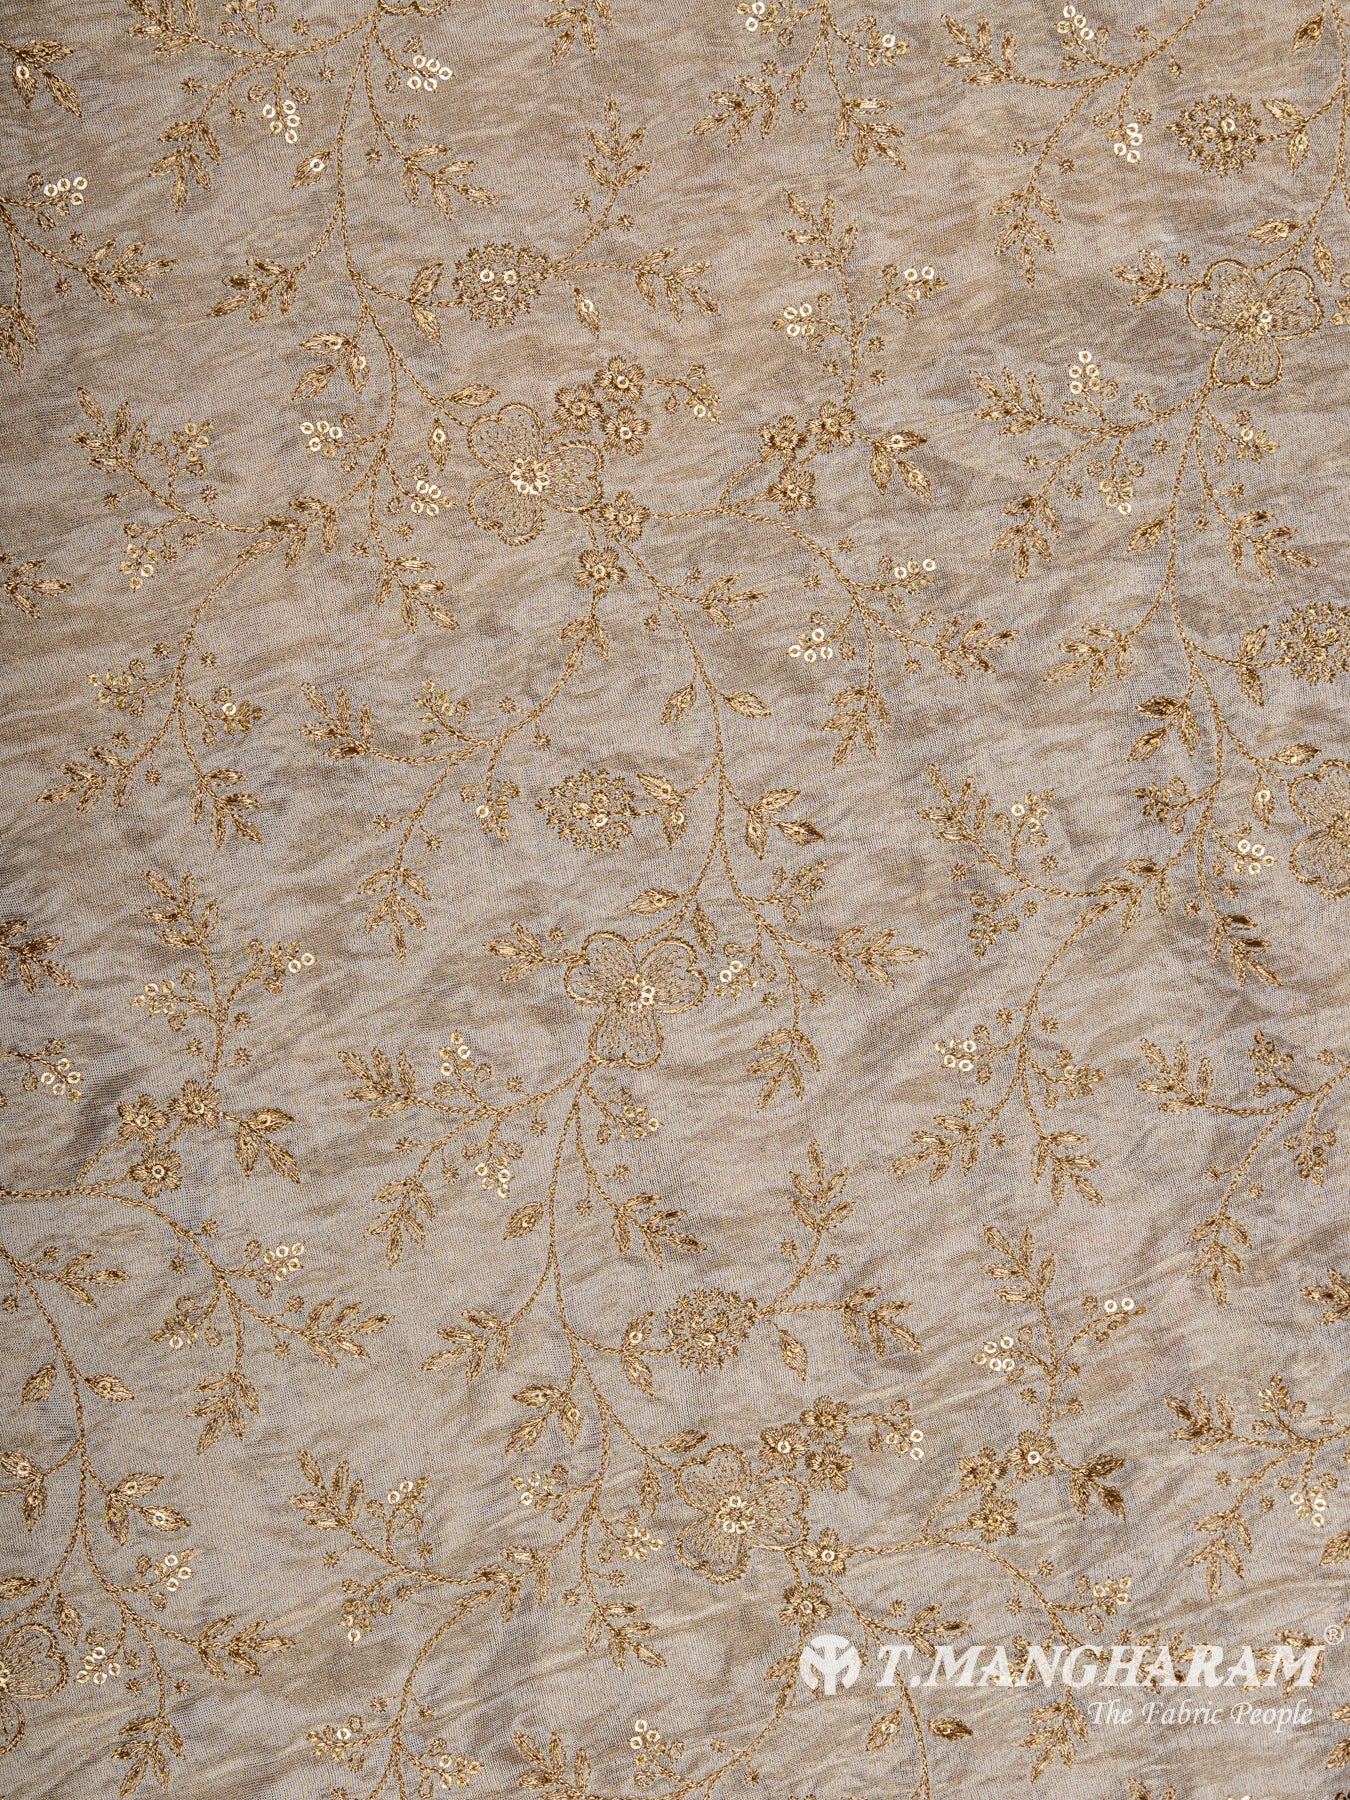 Beige Tissue Embroidery Fabric - EB4881 view-3